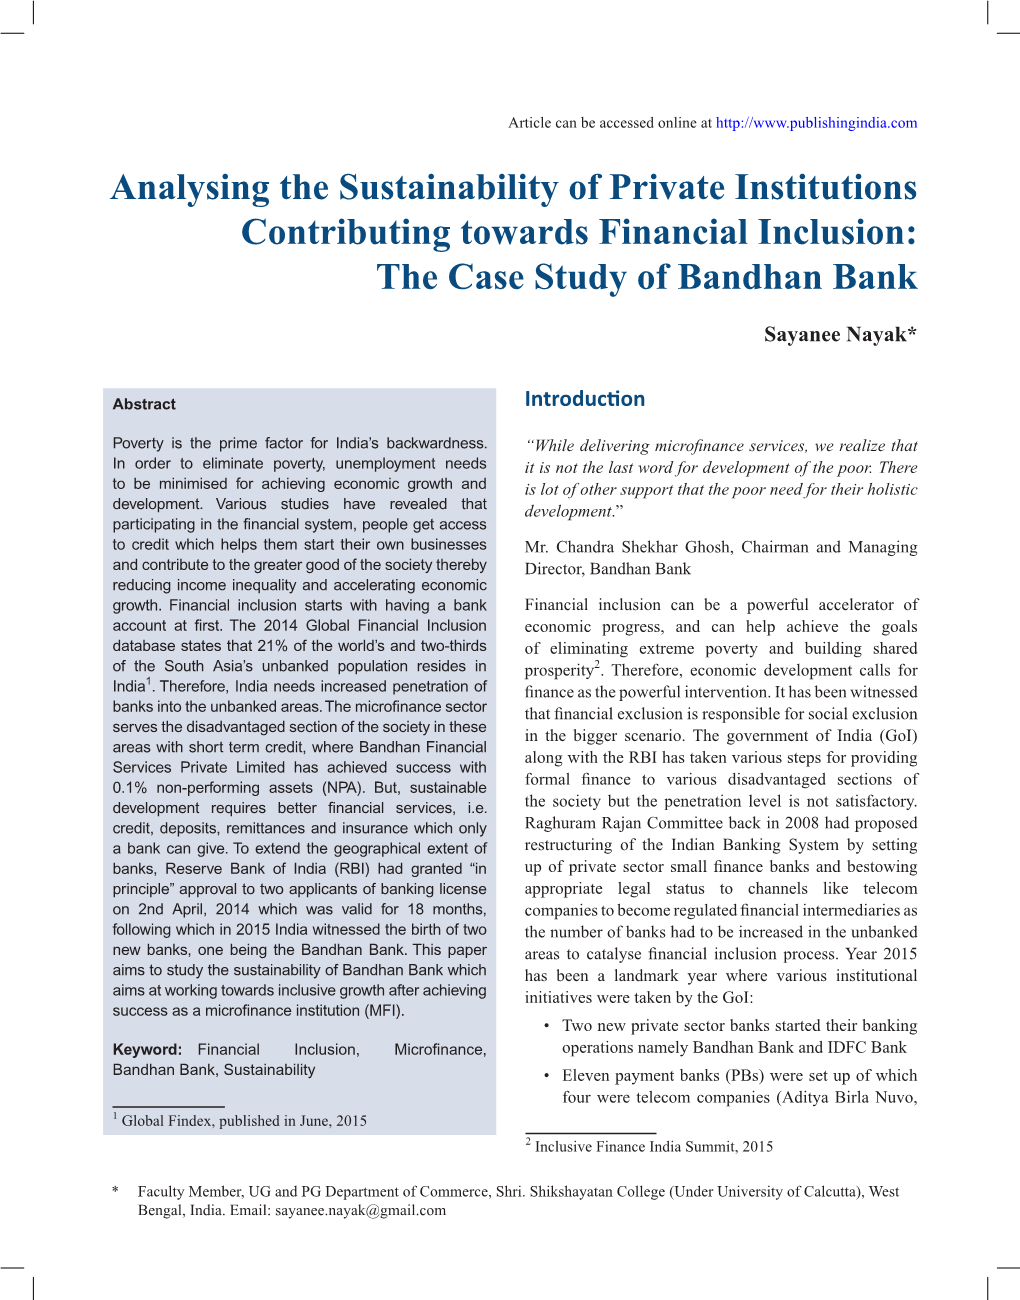 Analysing the Sustainability of Private Institutions Contributing Towards Financial Inclusion: the Case Study of Bandhan Bank